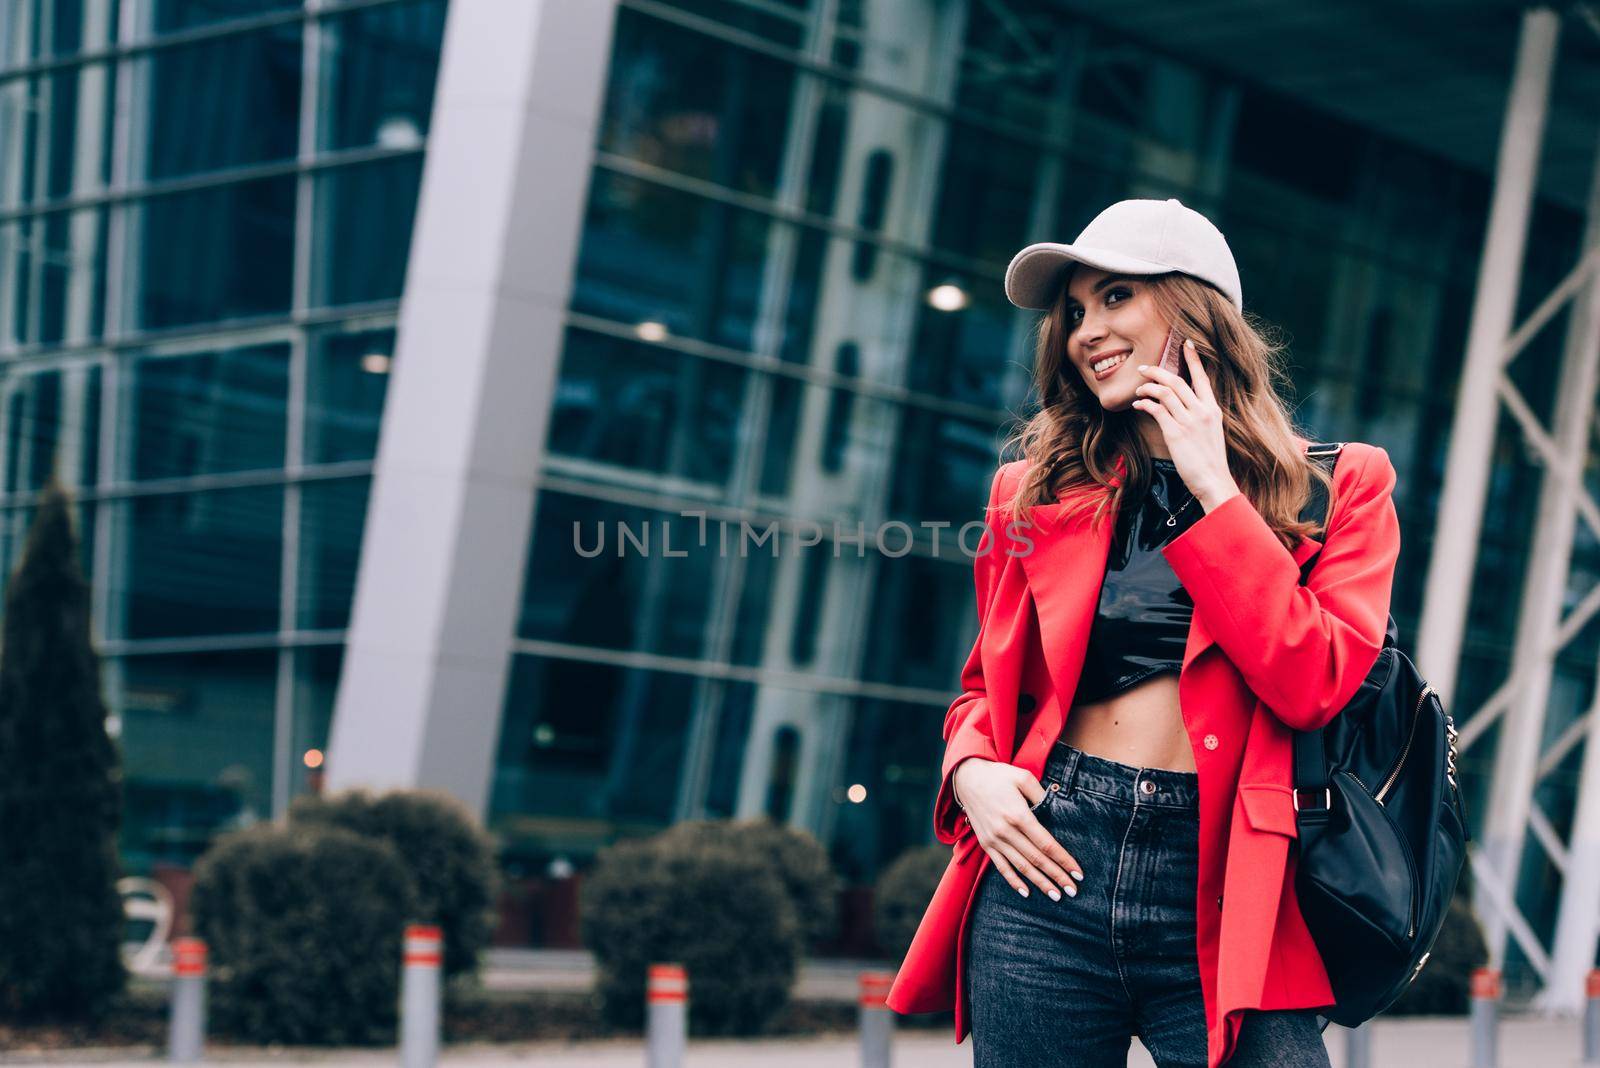 Stylish woman on the street uses a mobile phone. beautiful woman with long dark hair in a red jacket, black top and a cap